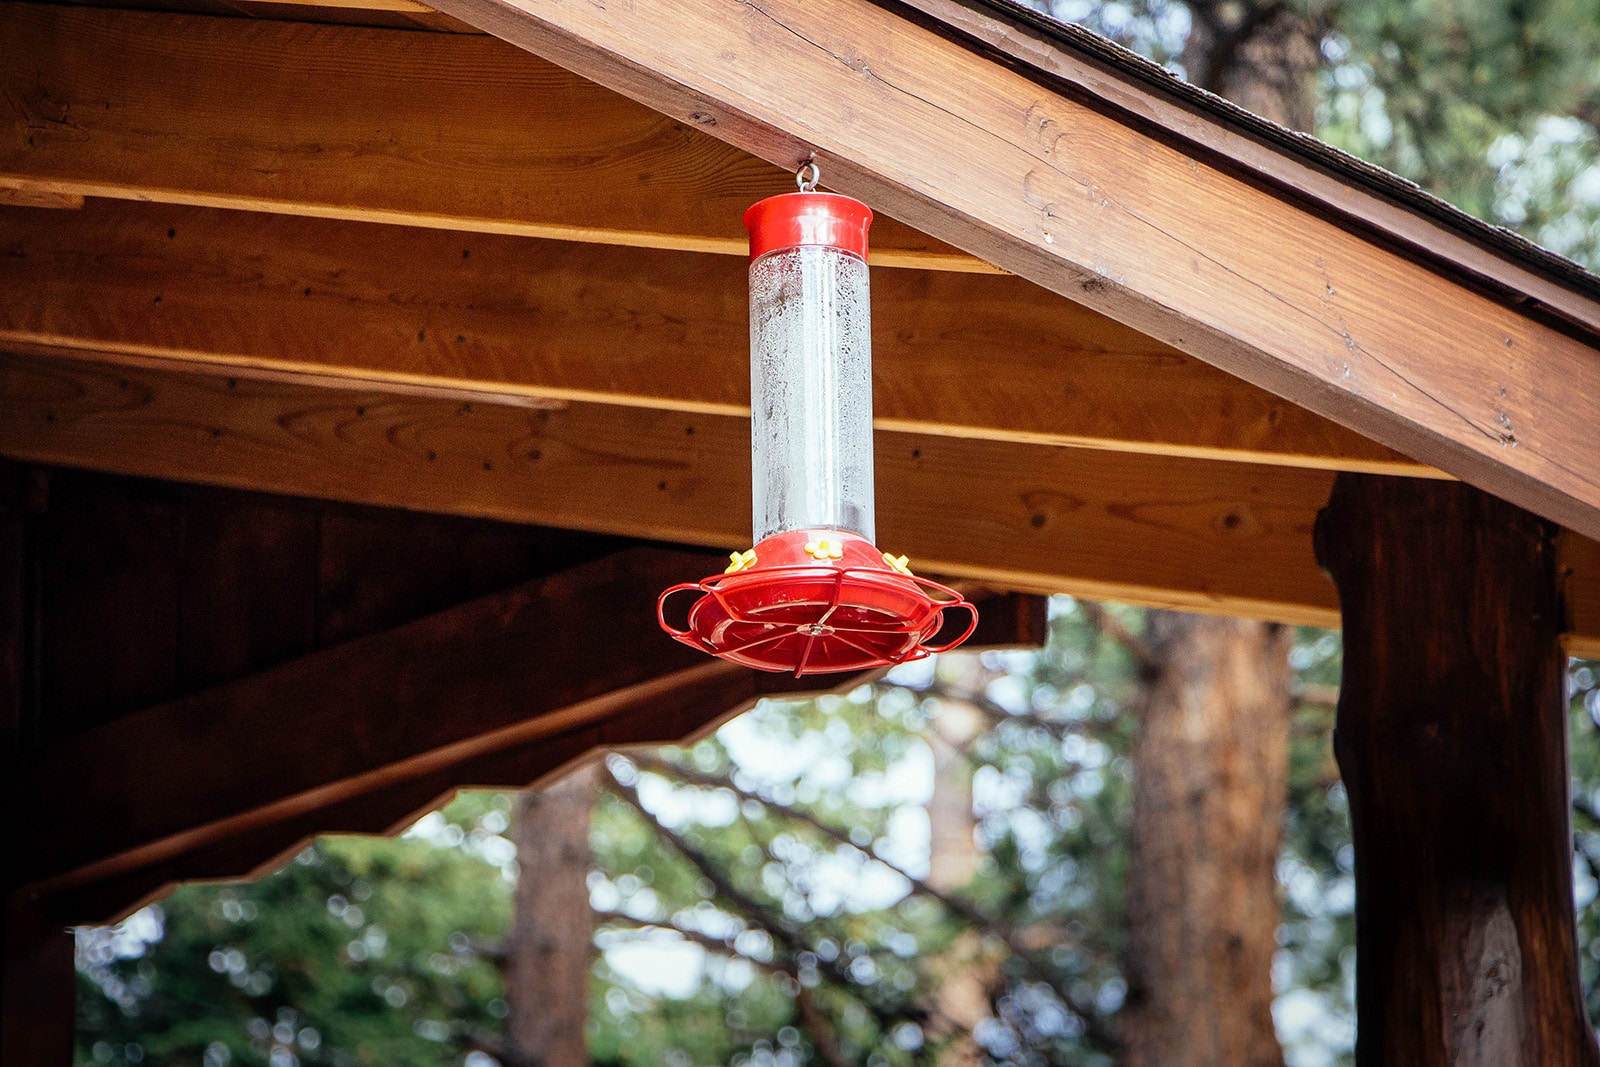 Hummingbird feeder hanging under a covered porch